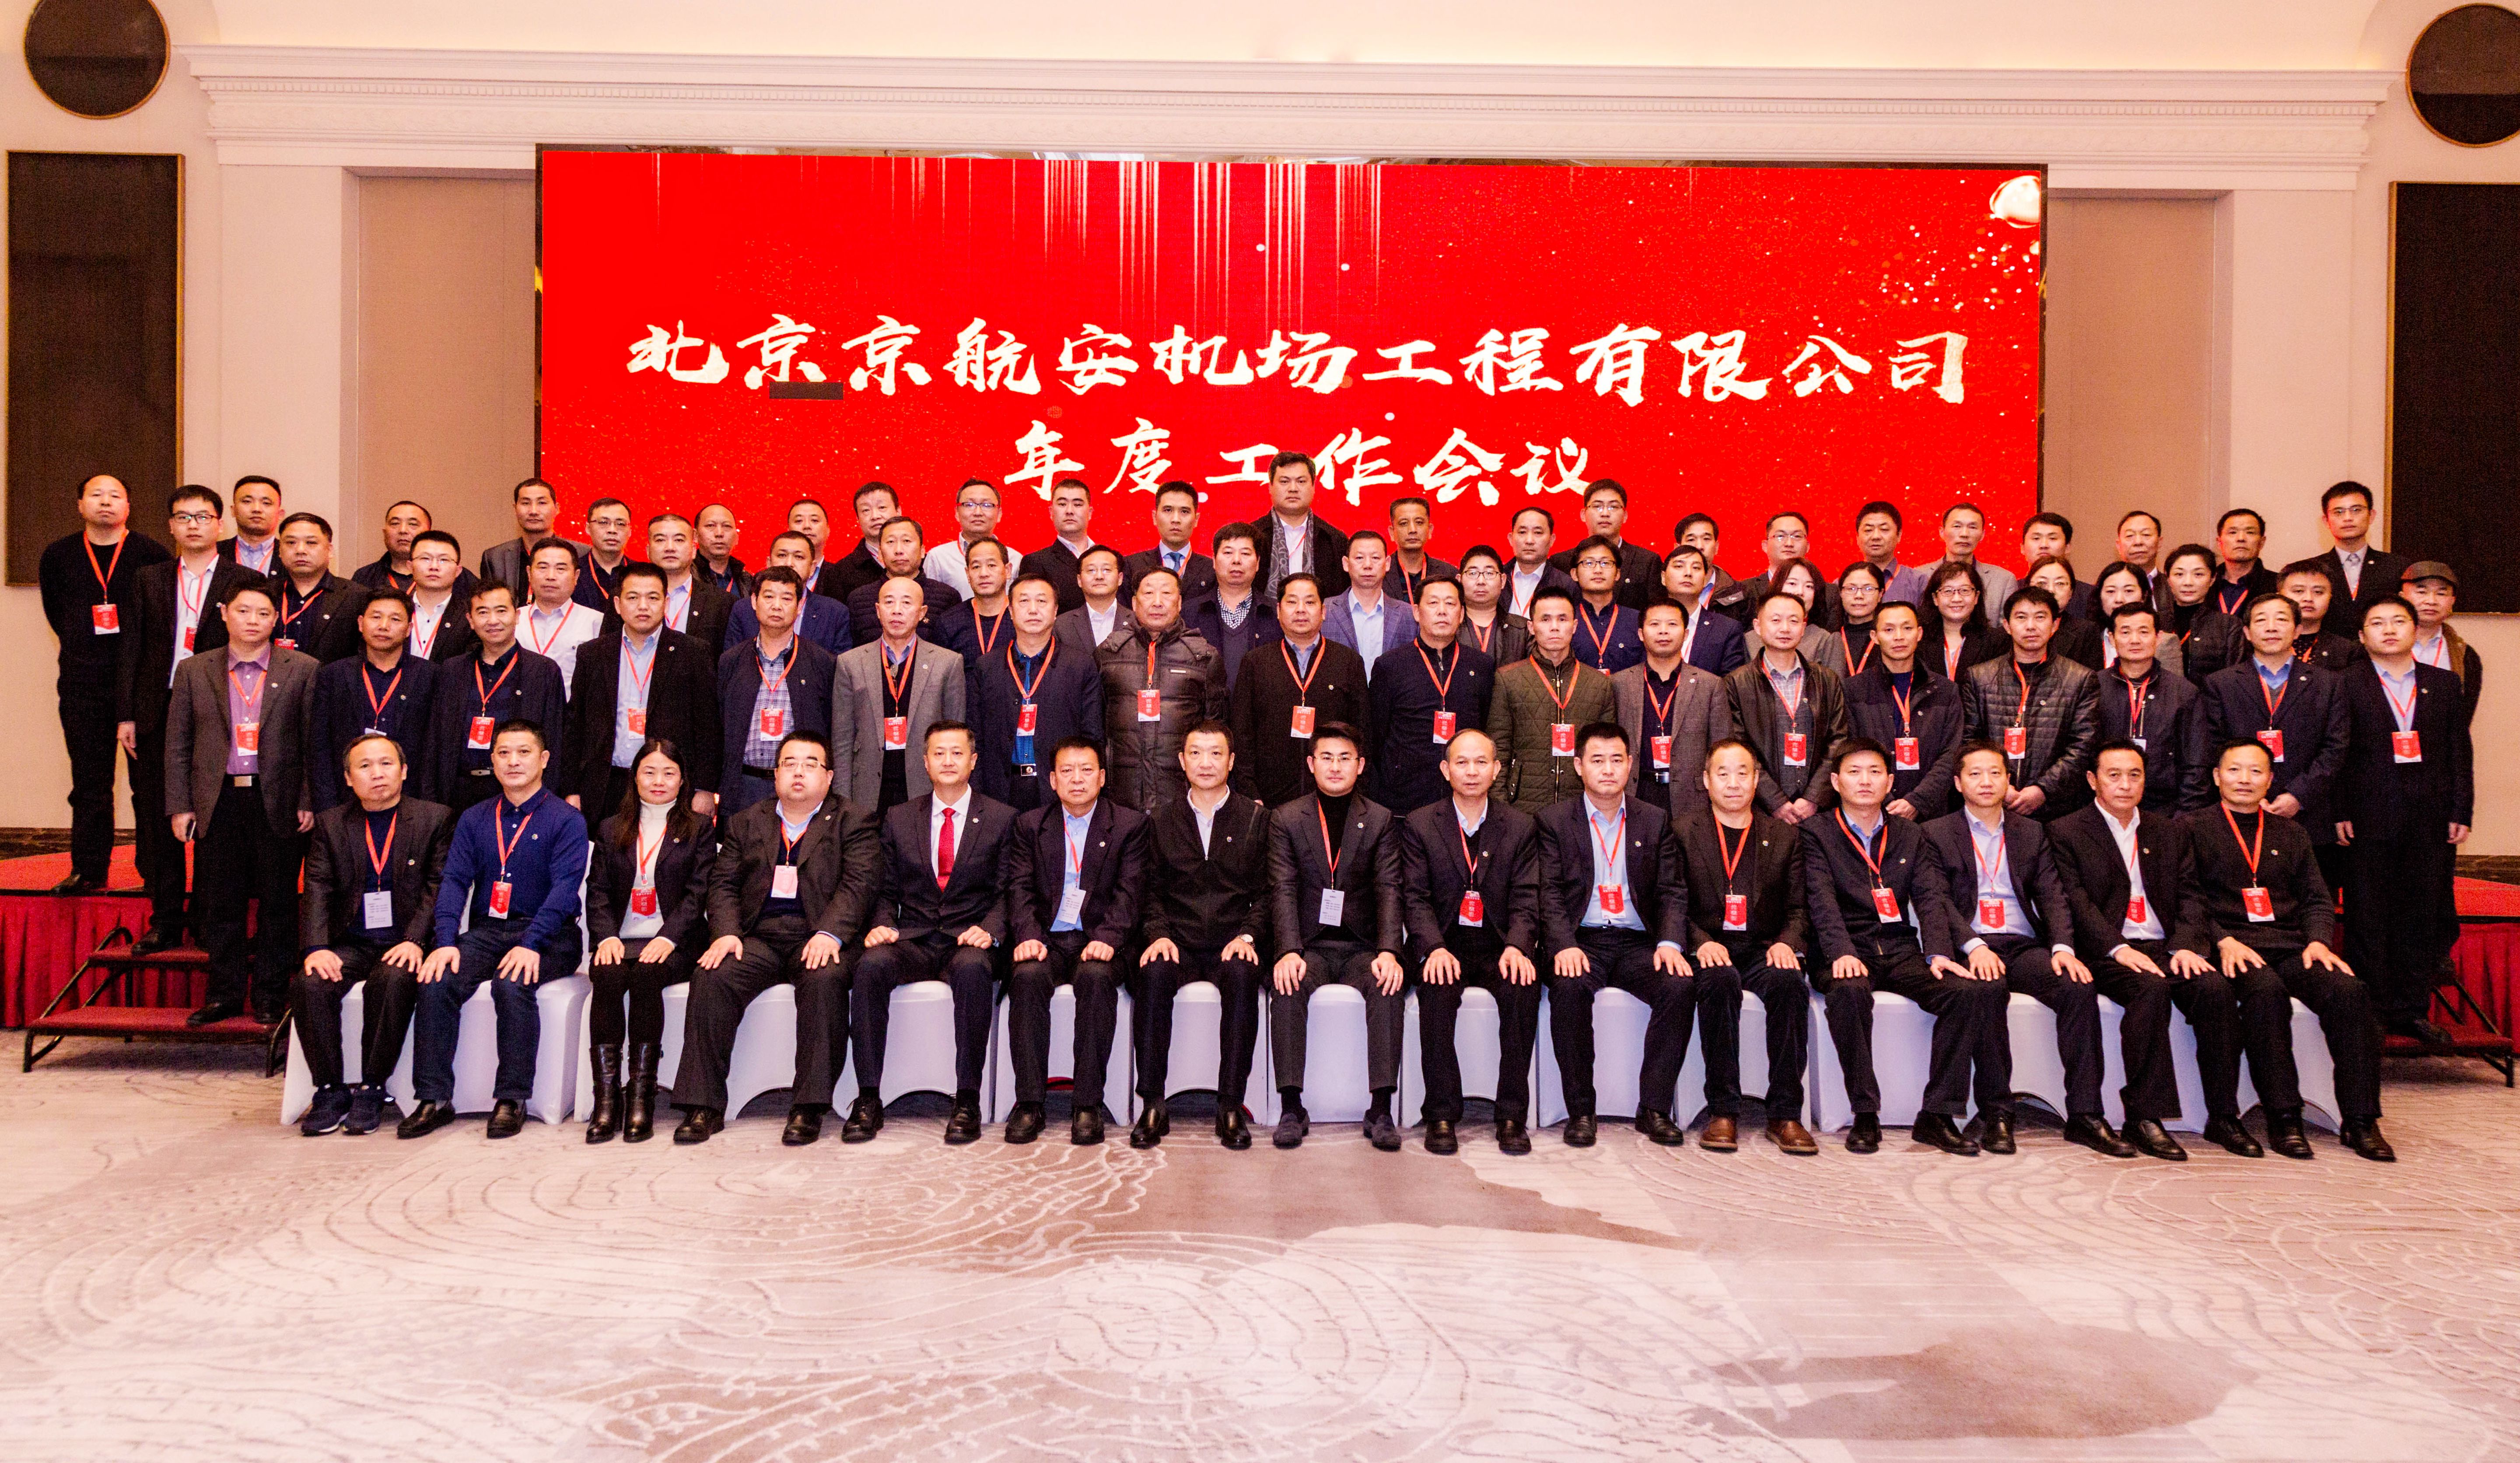 Group photo of 2019 annual meeting